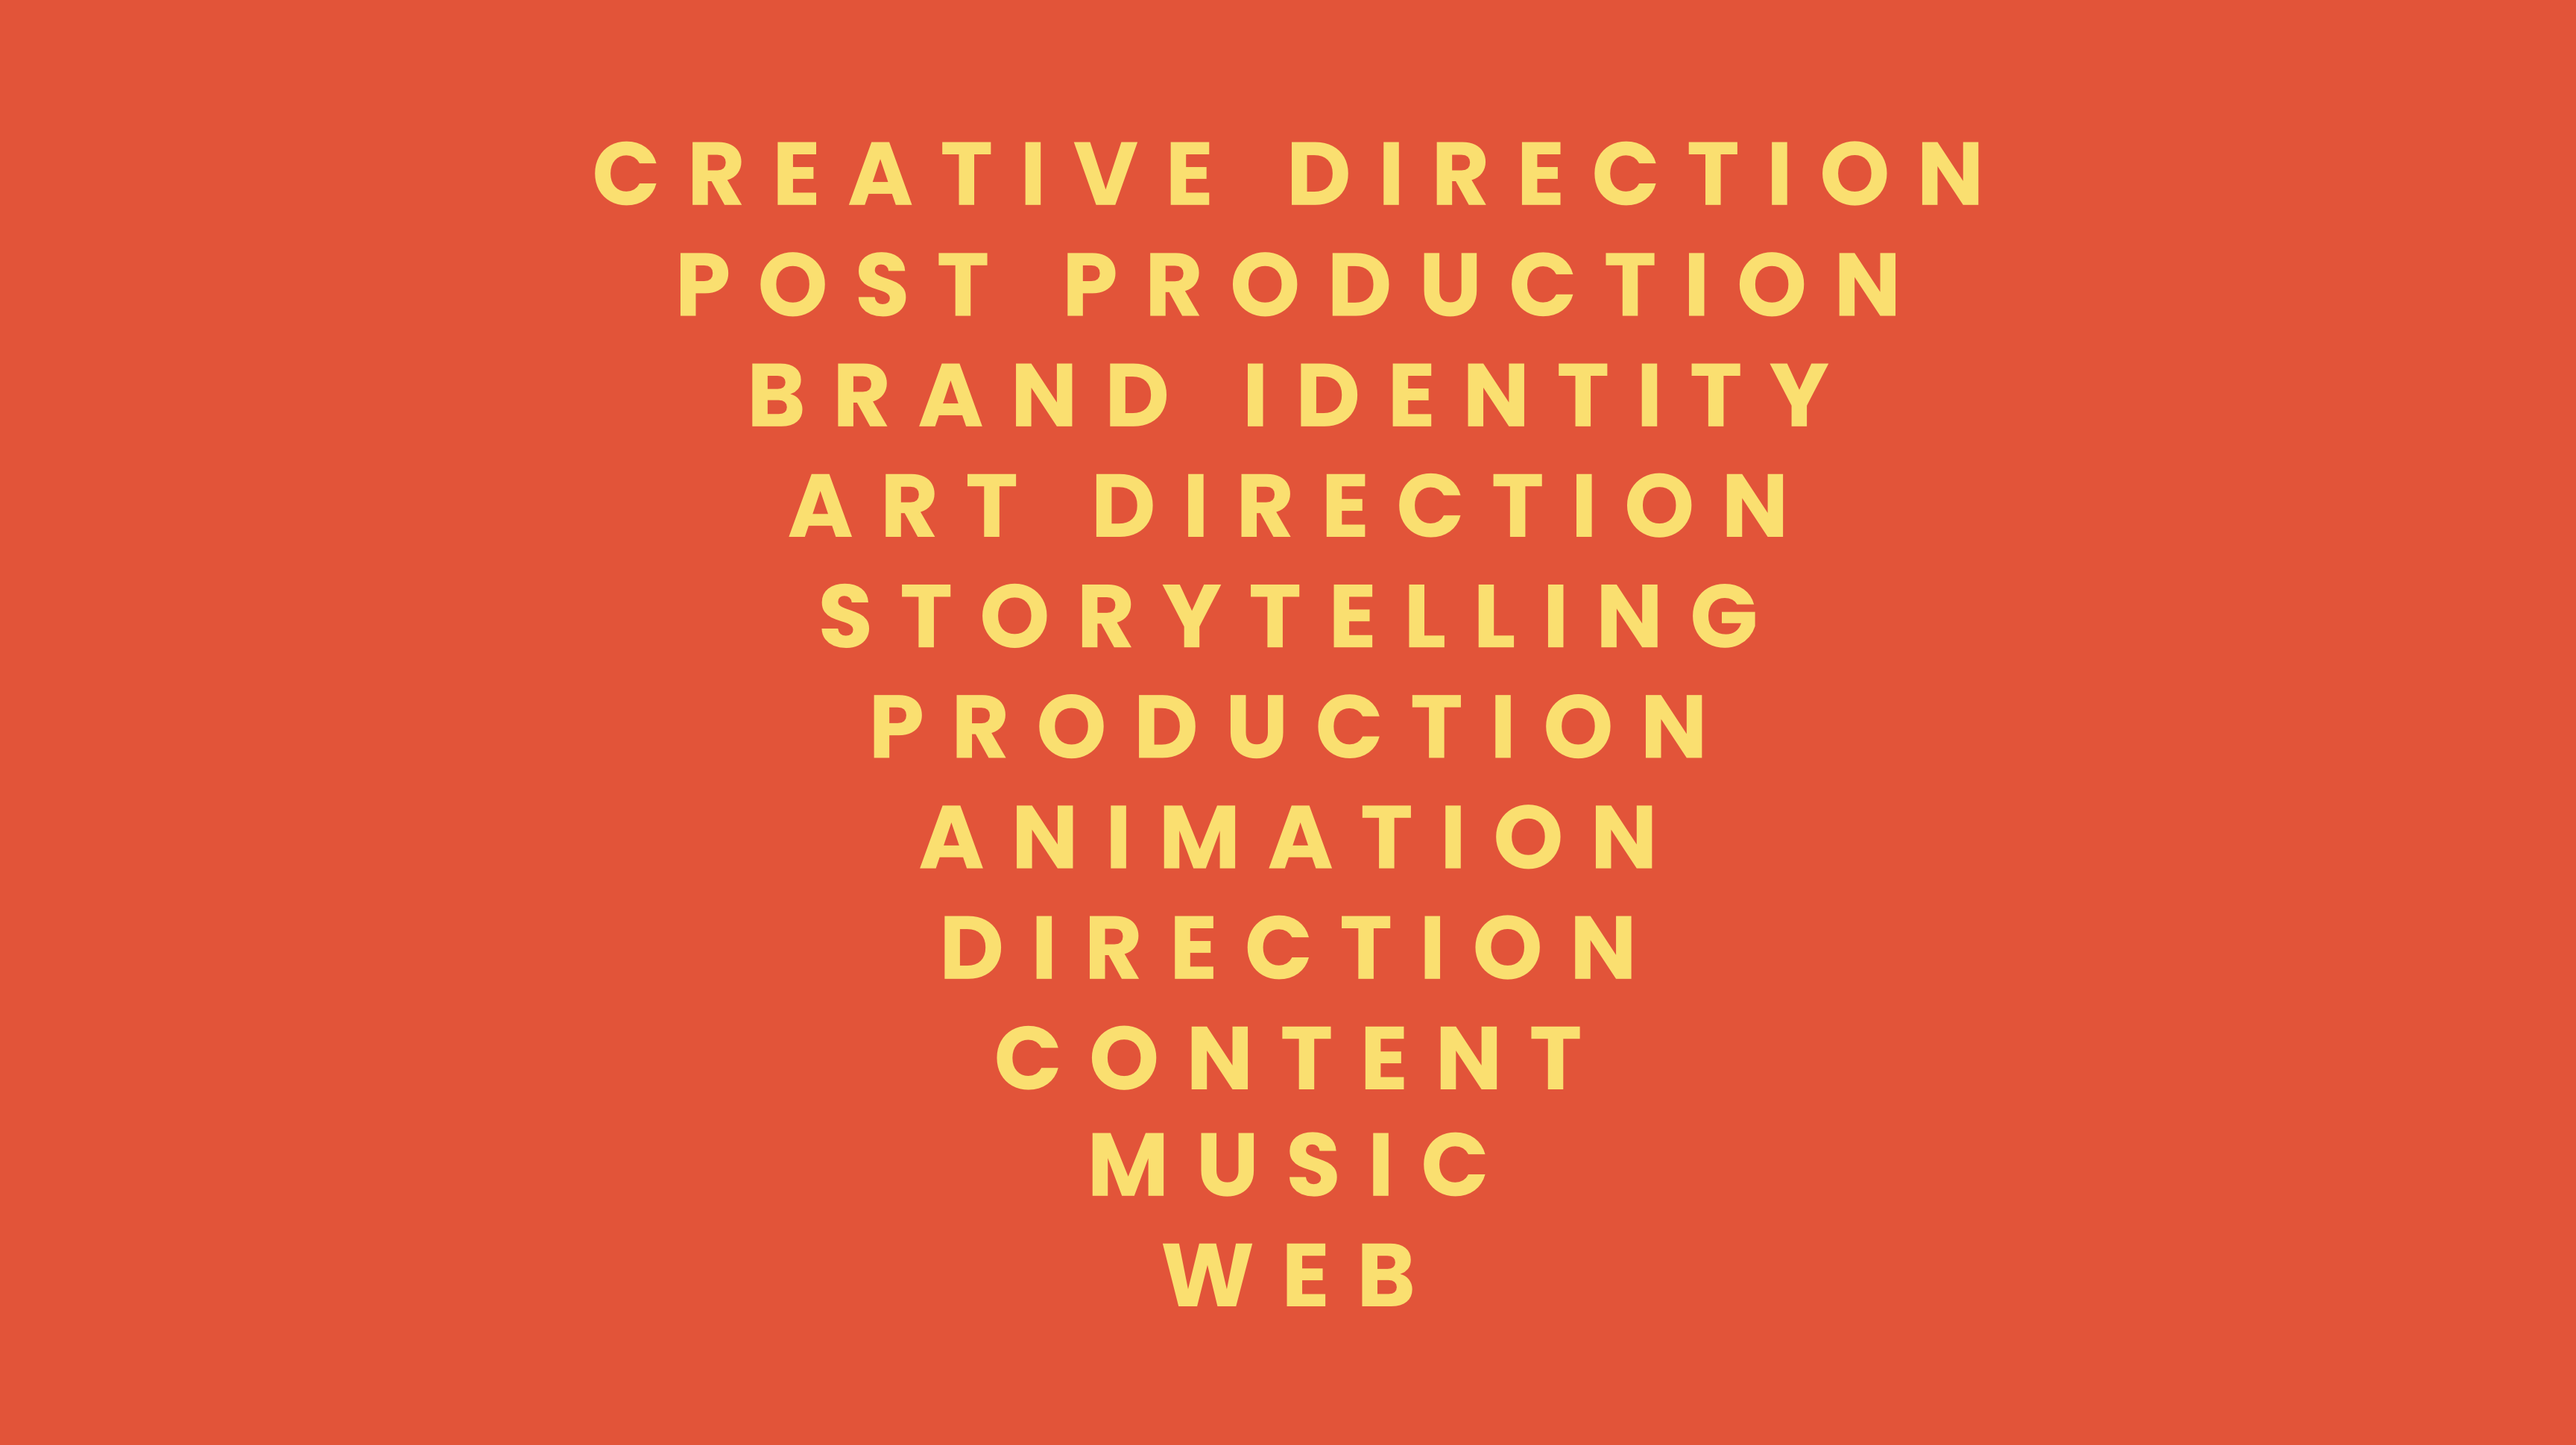 Some of our Creative Agency services include Creative Direction, Post Production, Brand Identity, Art Direction, Storytelling, Production, Animation, Direction, Content, Music, Web.